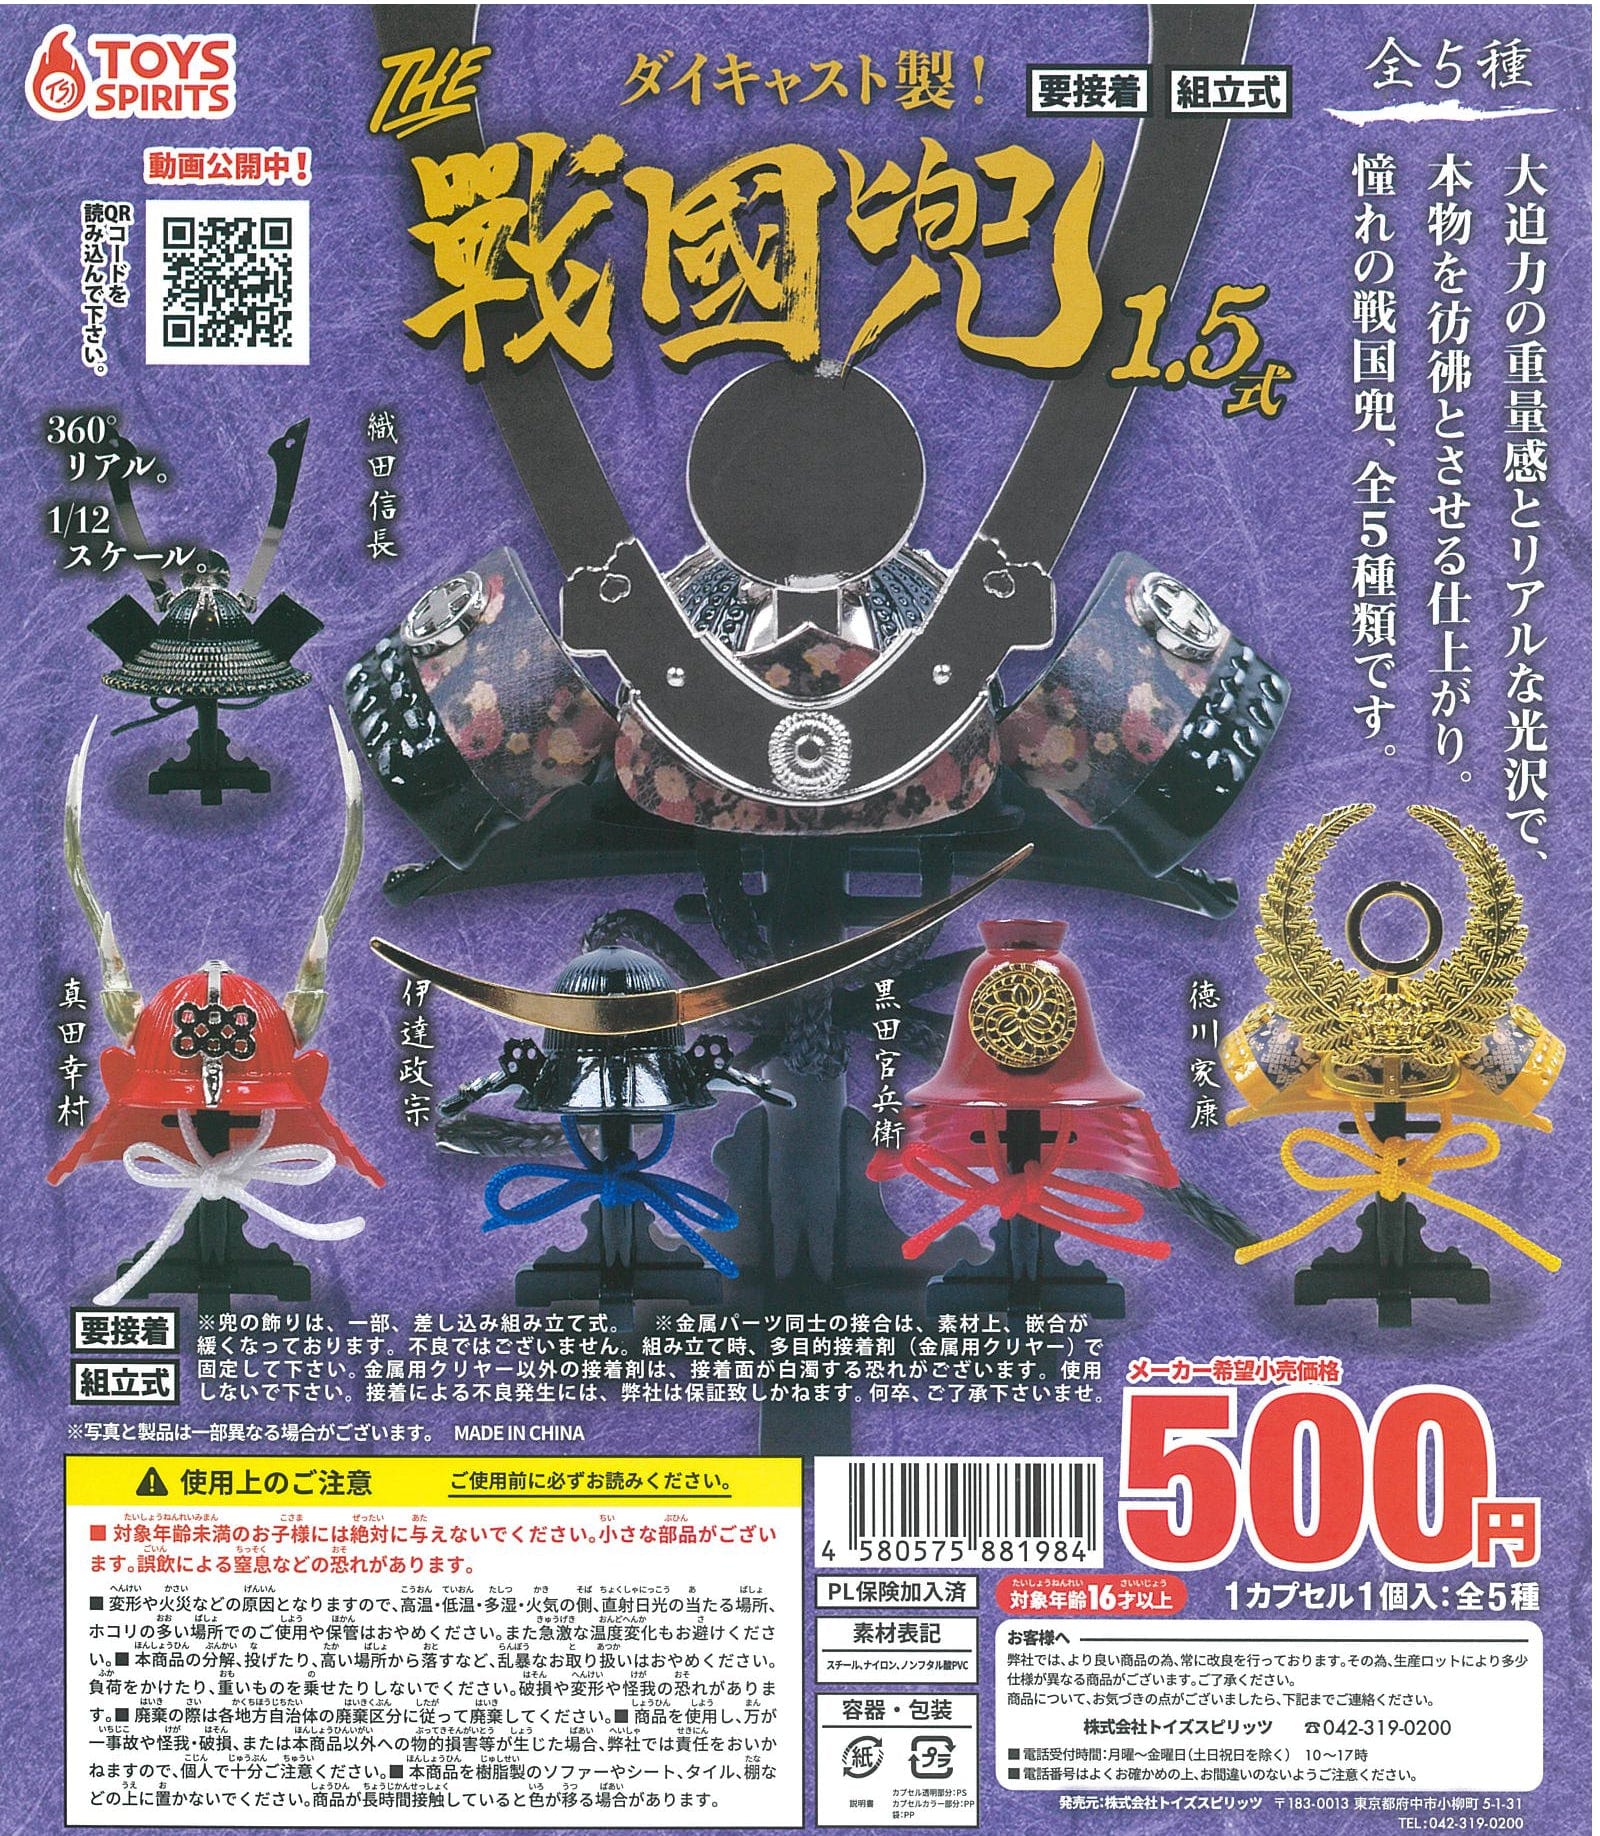 TOYS SPIRITS CP1186 Die-cast Model! The Sengoku Kabuto -One Point Five